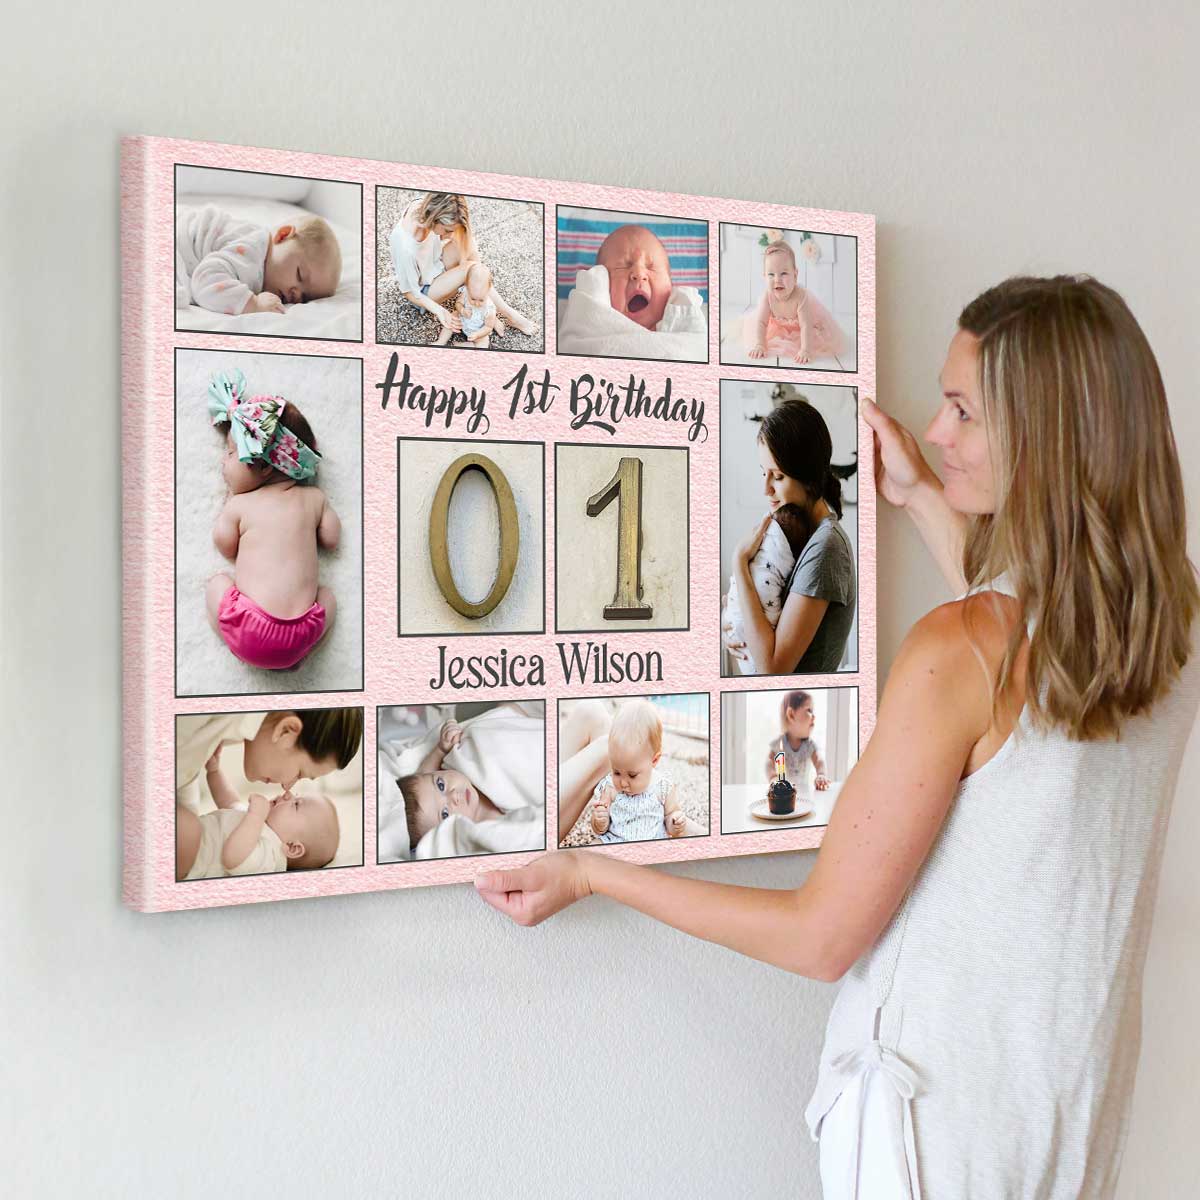 One Year Old Girl Gift Guide - arinsolangeathome | Girls gift guide, Baby  girl gifts, 1st birthday gifts